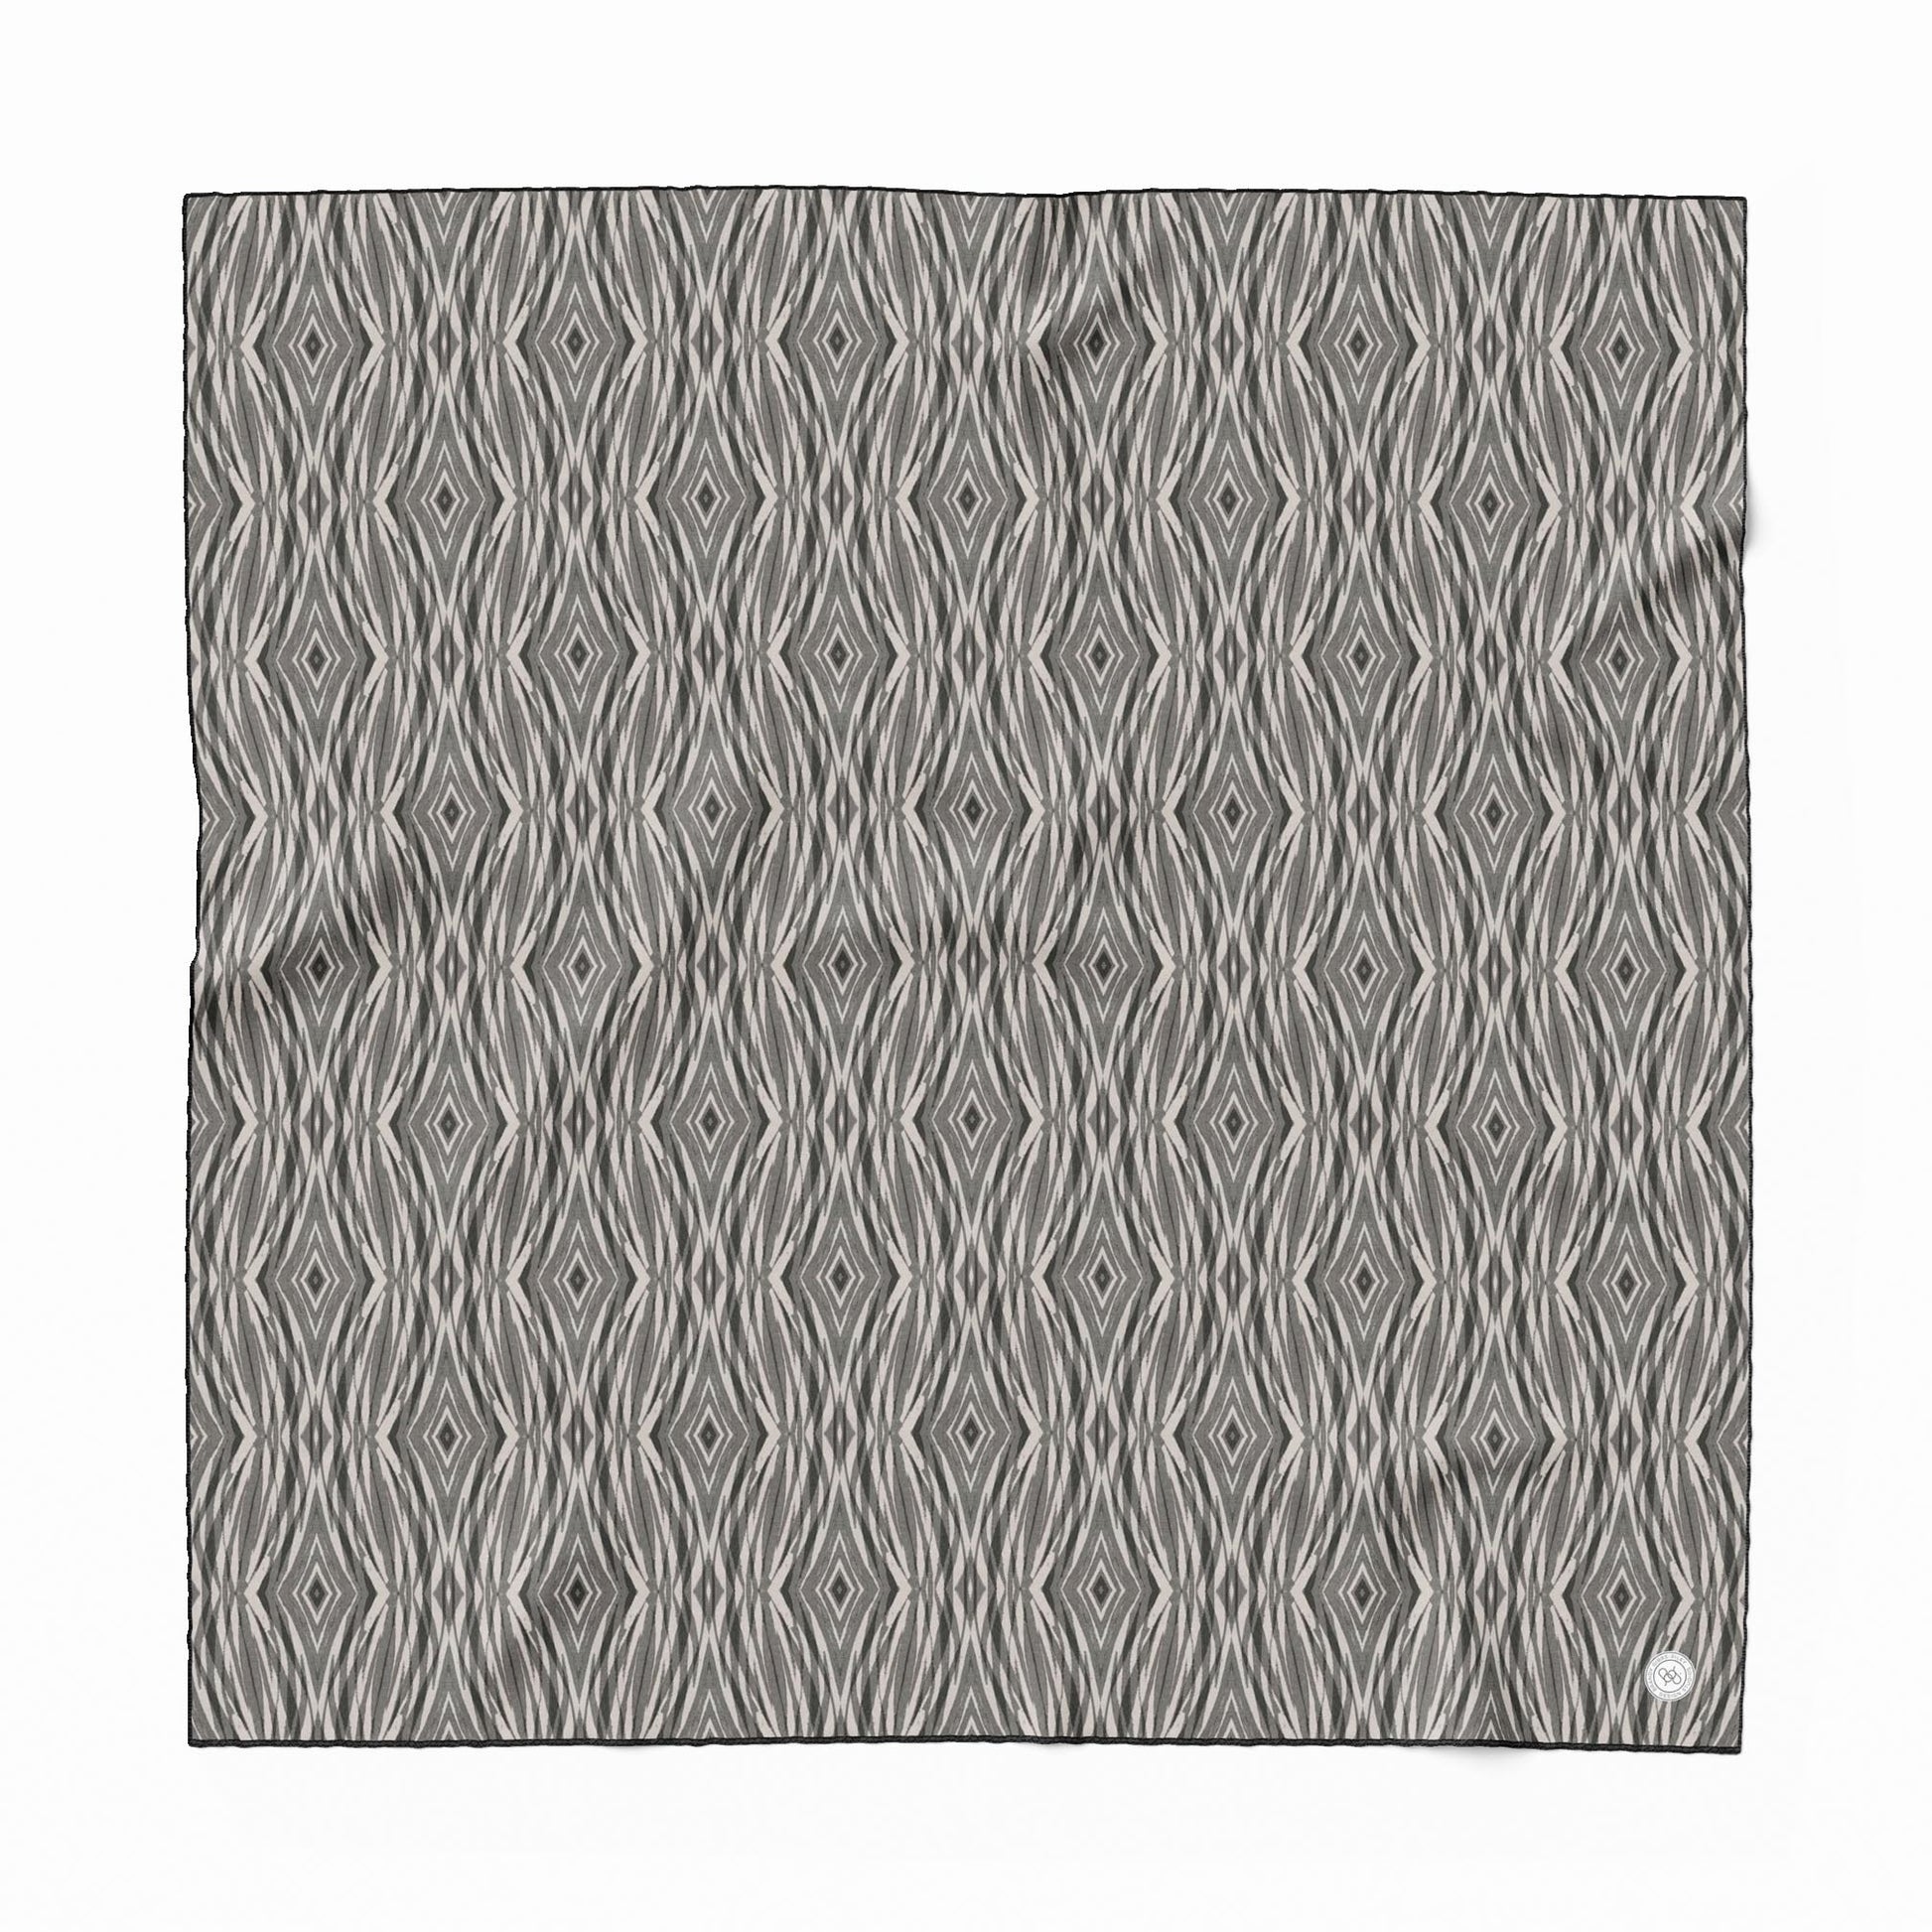 Ssilk scarf featuring a linocut pattern in beige, gray, and black.